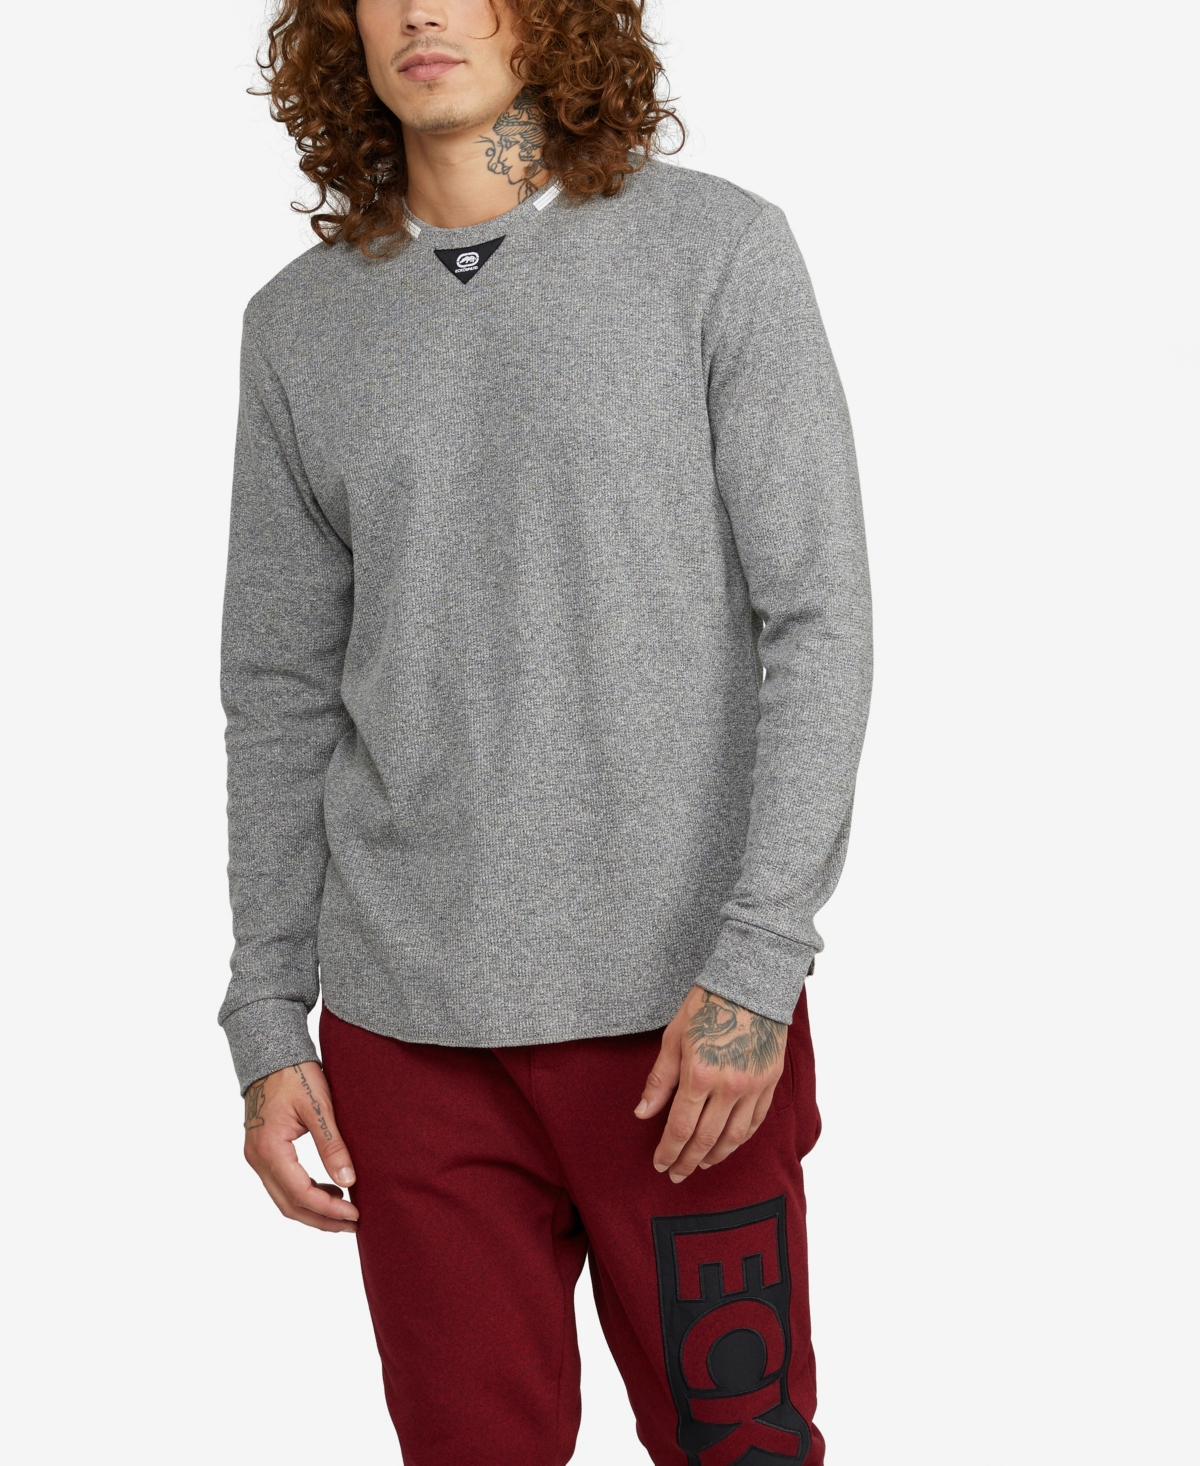 Men's Big and Tall Ready Set Thermal Sweater - Gray